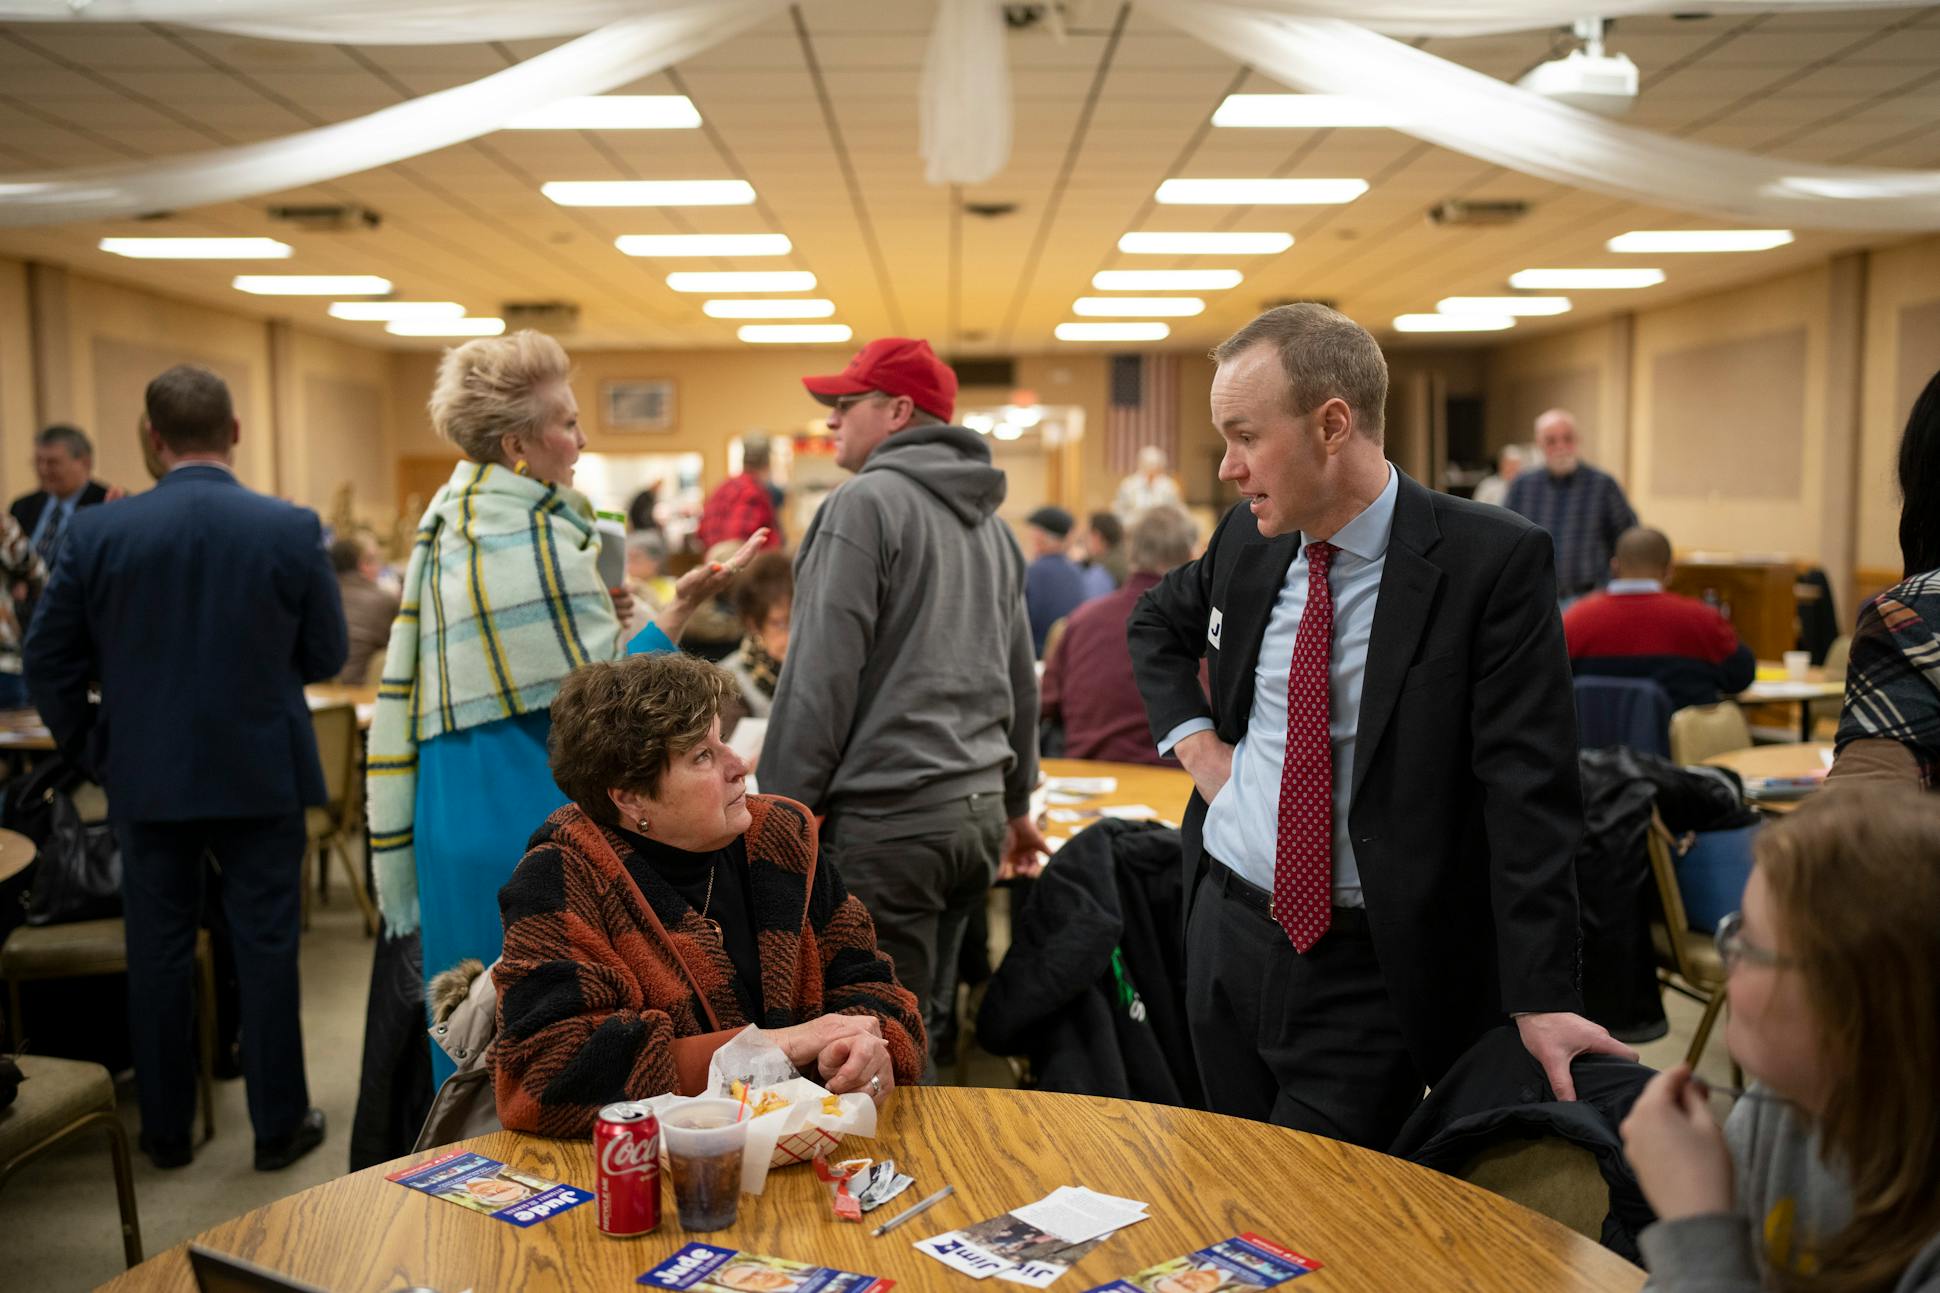 Attorney general candidates Jim Schultz, foreground, and Lynne Torgerson, standing rear, chatted with attendees before a GOP debate in Owatonna.